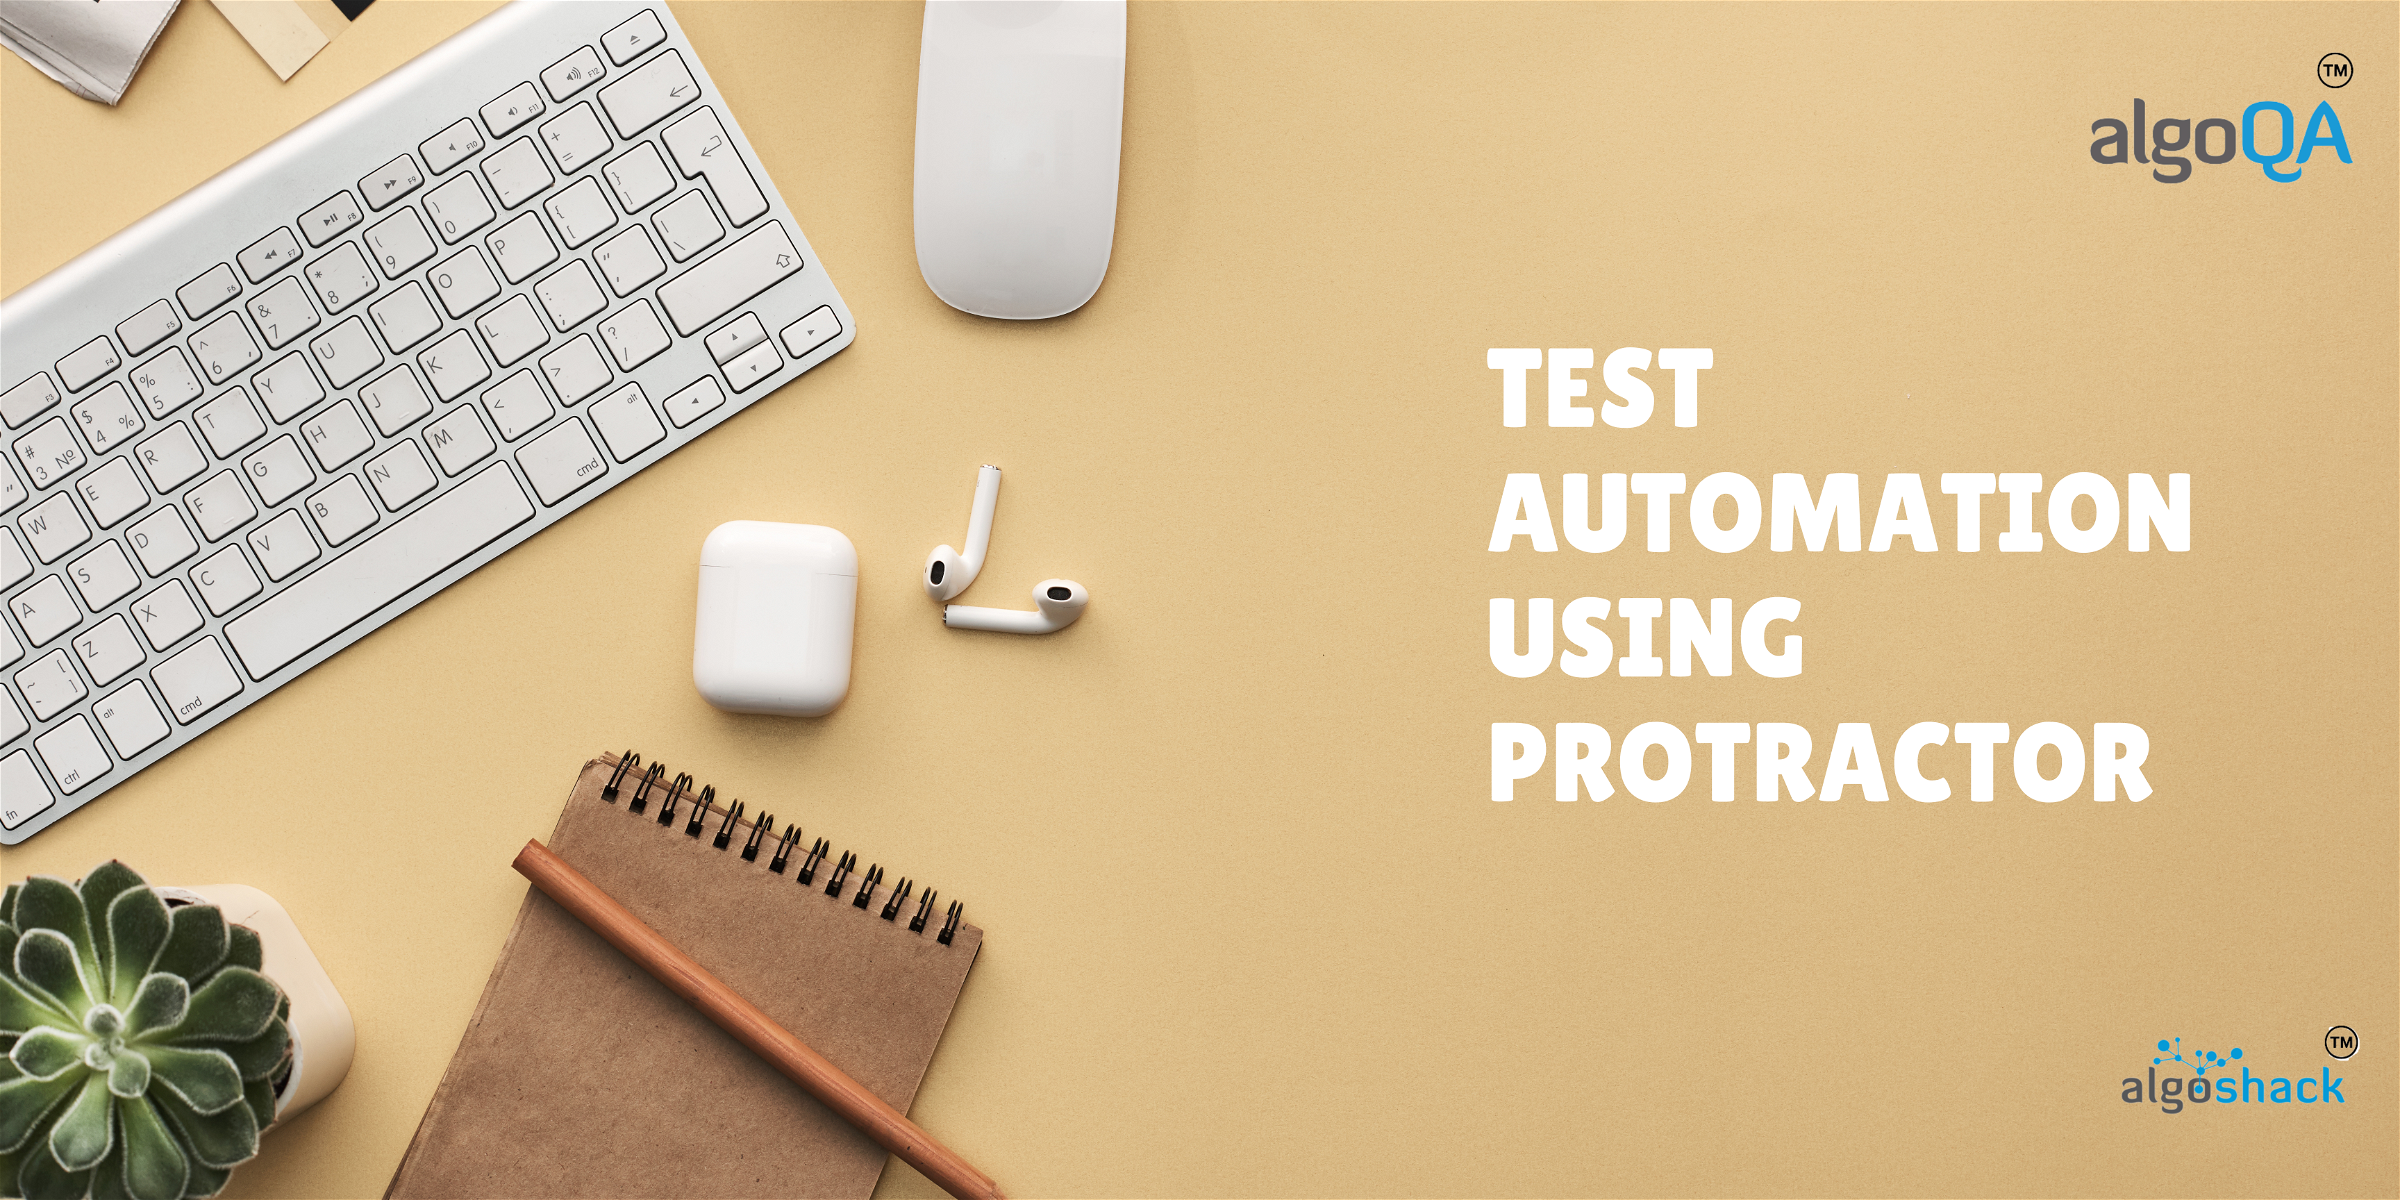 Test Automation Using Protractor